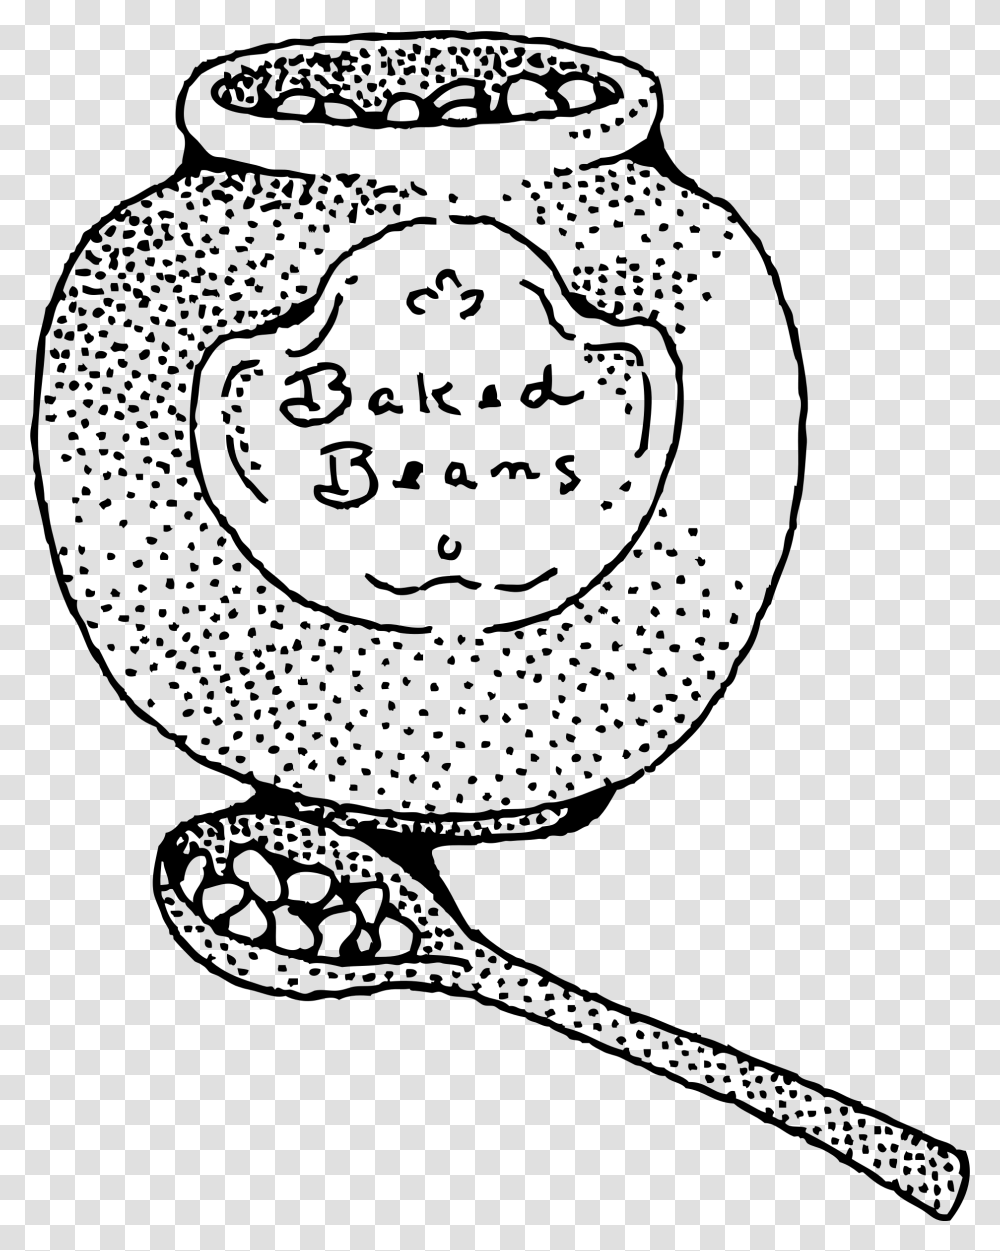 Baked Beans Clip Arts Baked Beans Clip Art Black And White, Gray, World Of Warcraft Transparent Png